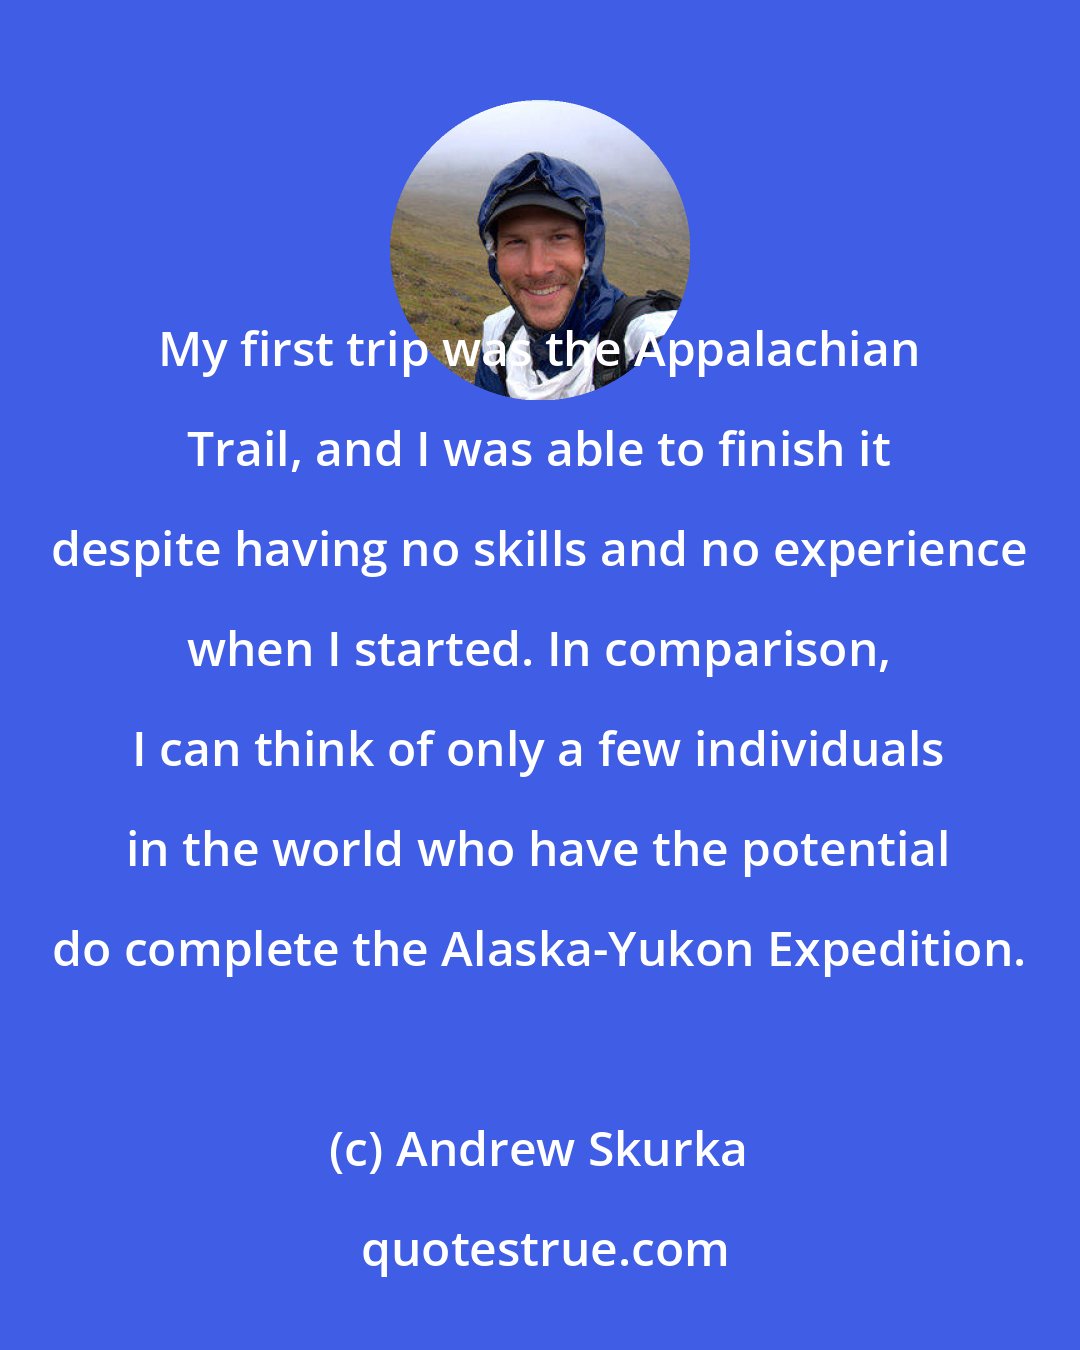 Andrew Skurka: My first trip was the Appalachian Trail, and I was able to finish it despite having no skills and no experience when I started. In comparison, I can think of only a few individuals in the world who have the potential do complete the Alaska-Yukon Expedition.